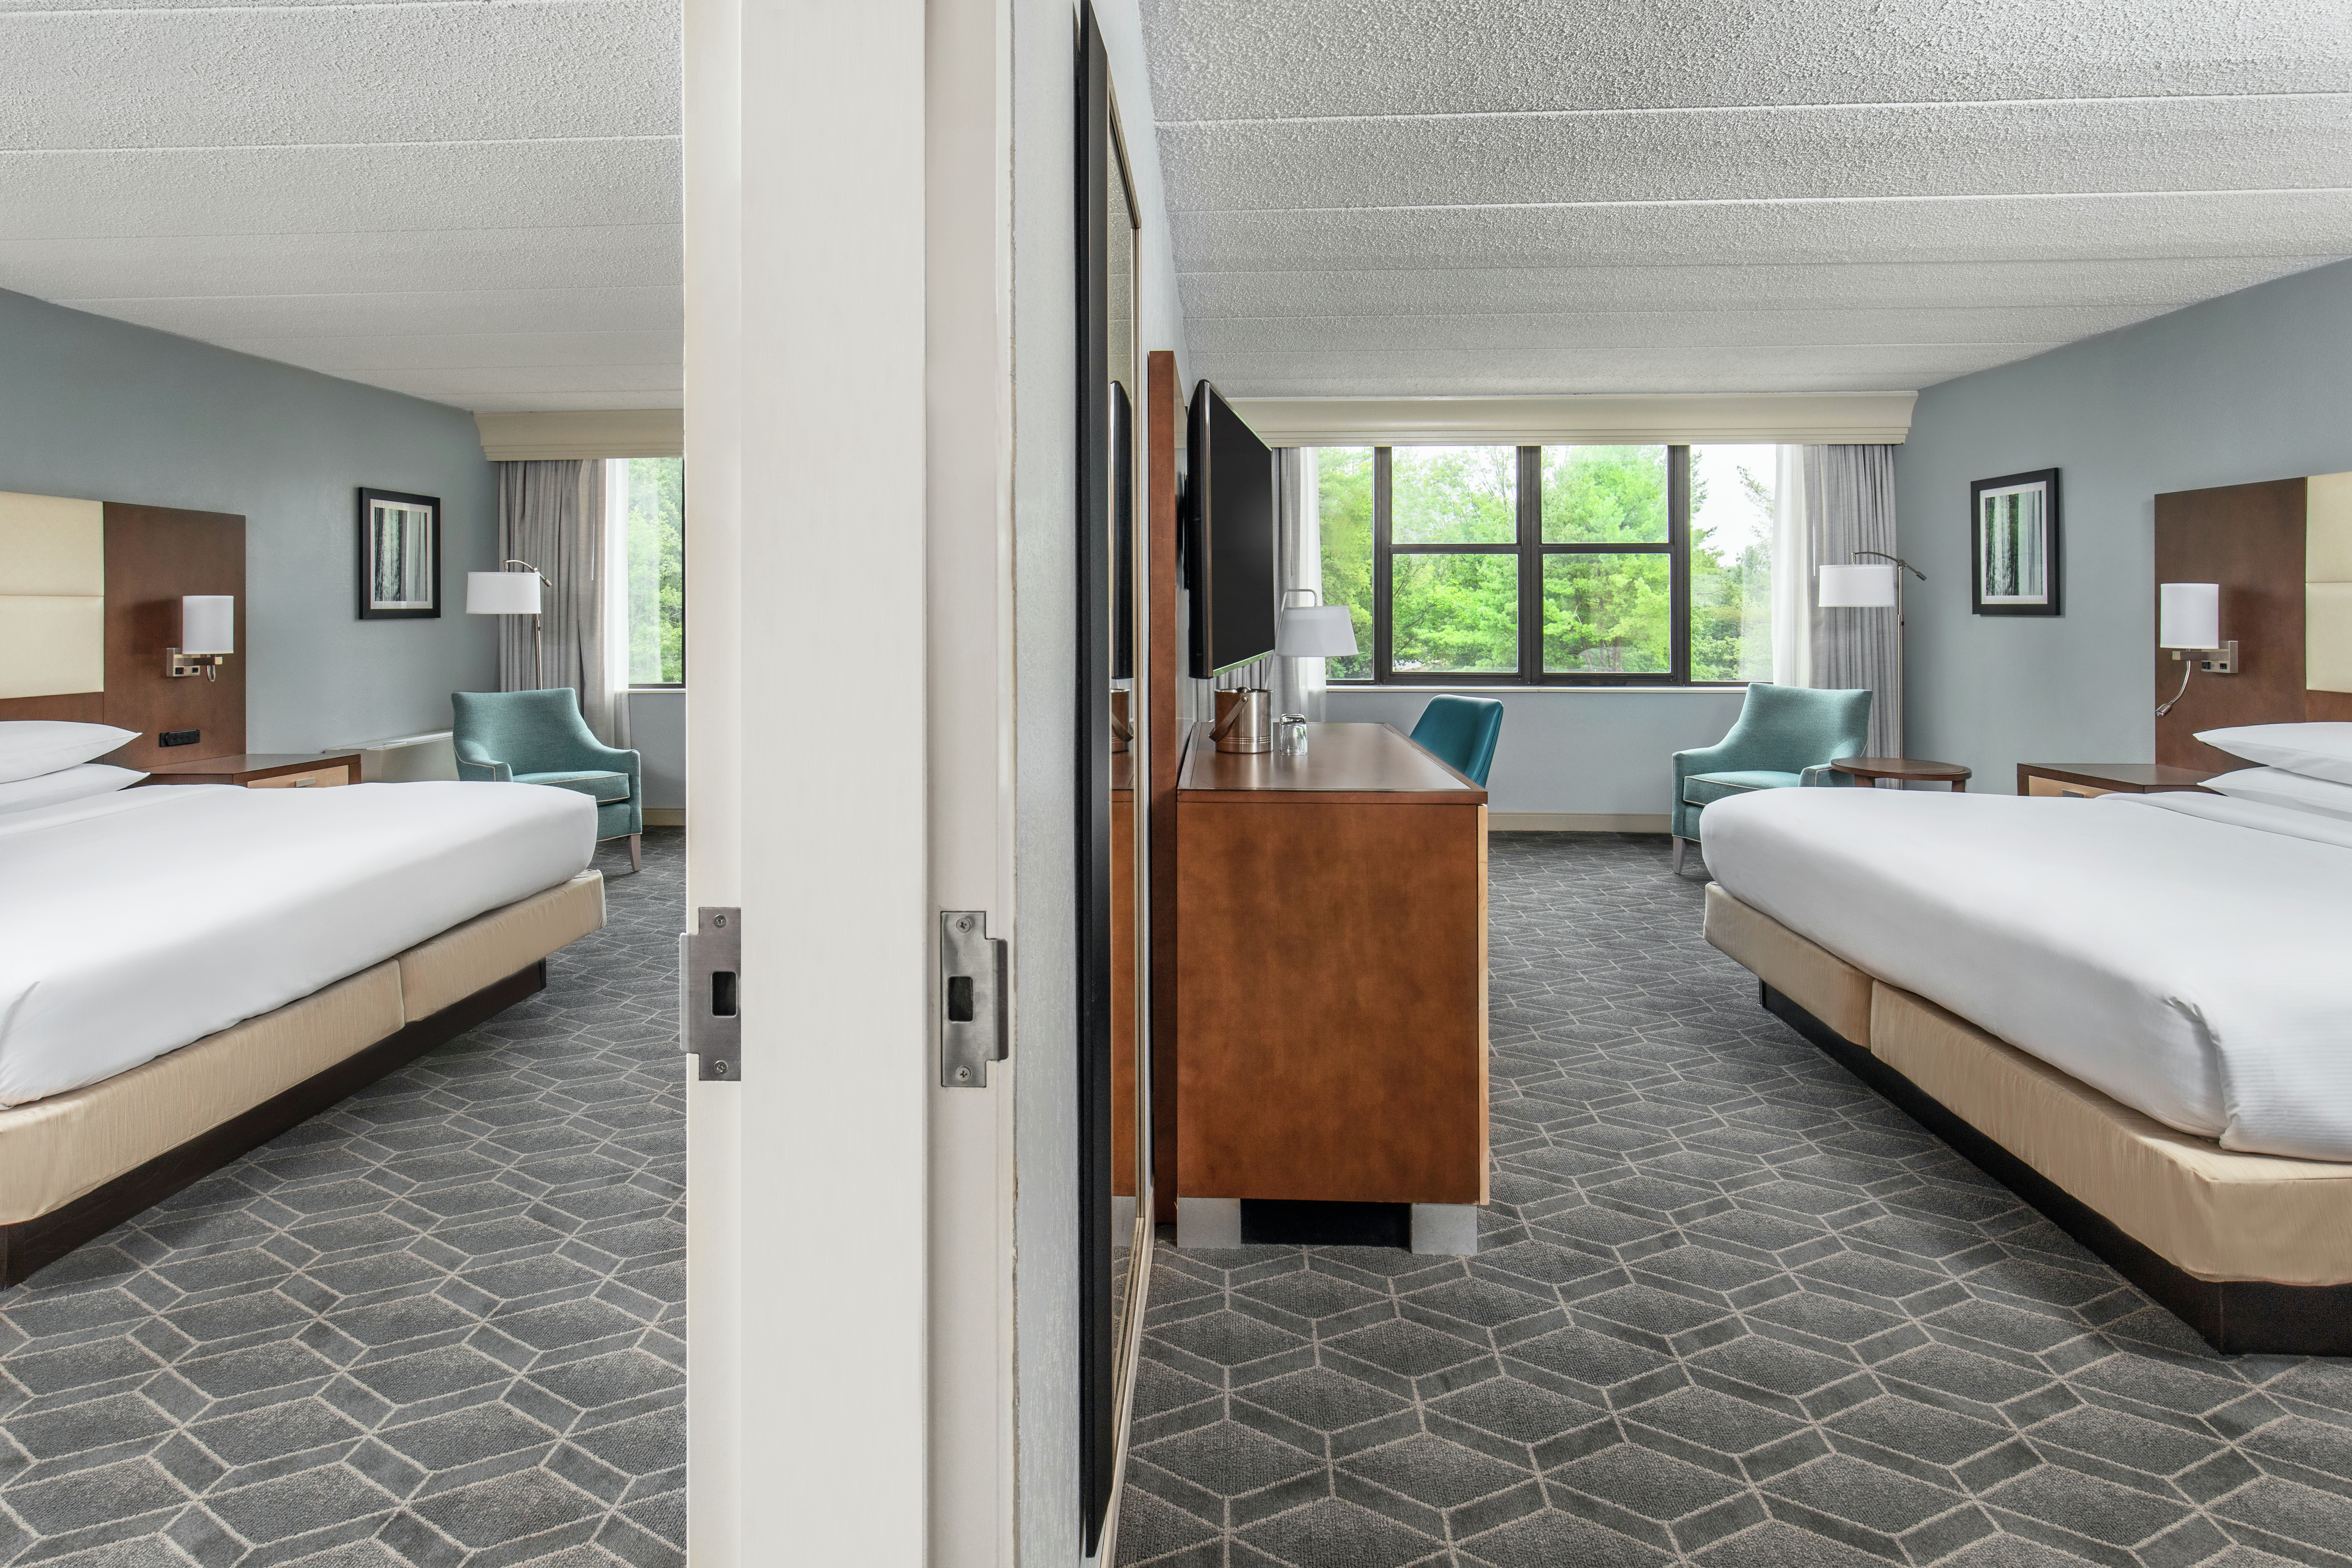 Two Standard King Guestrooms Connected